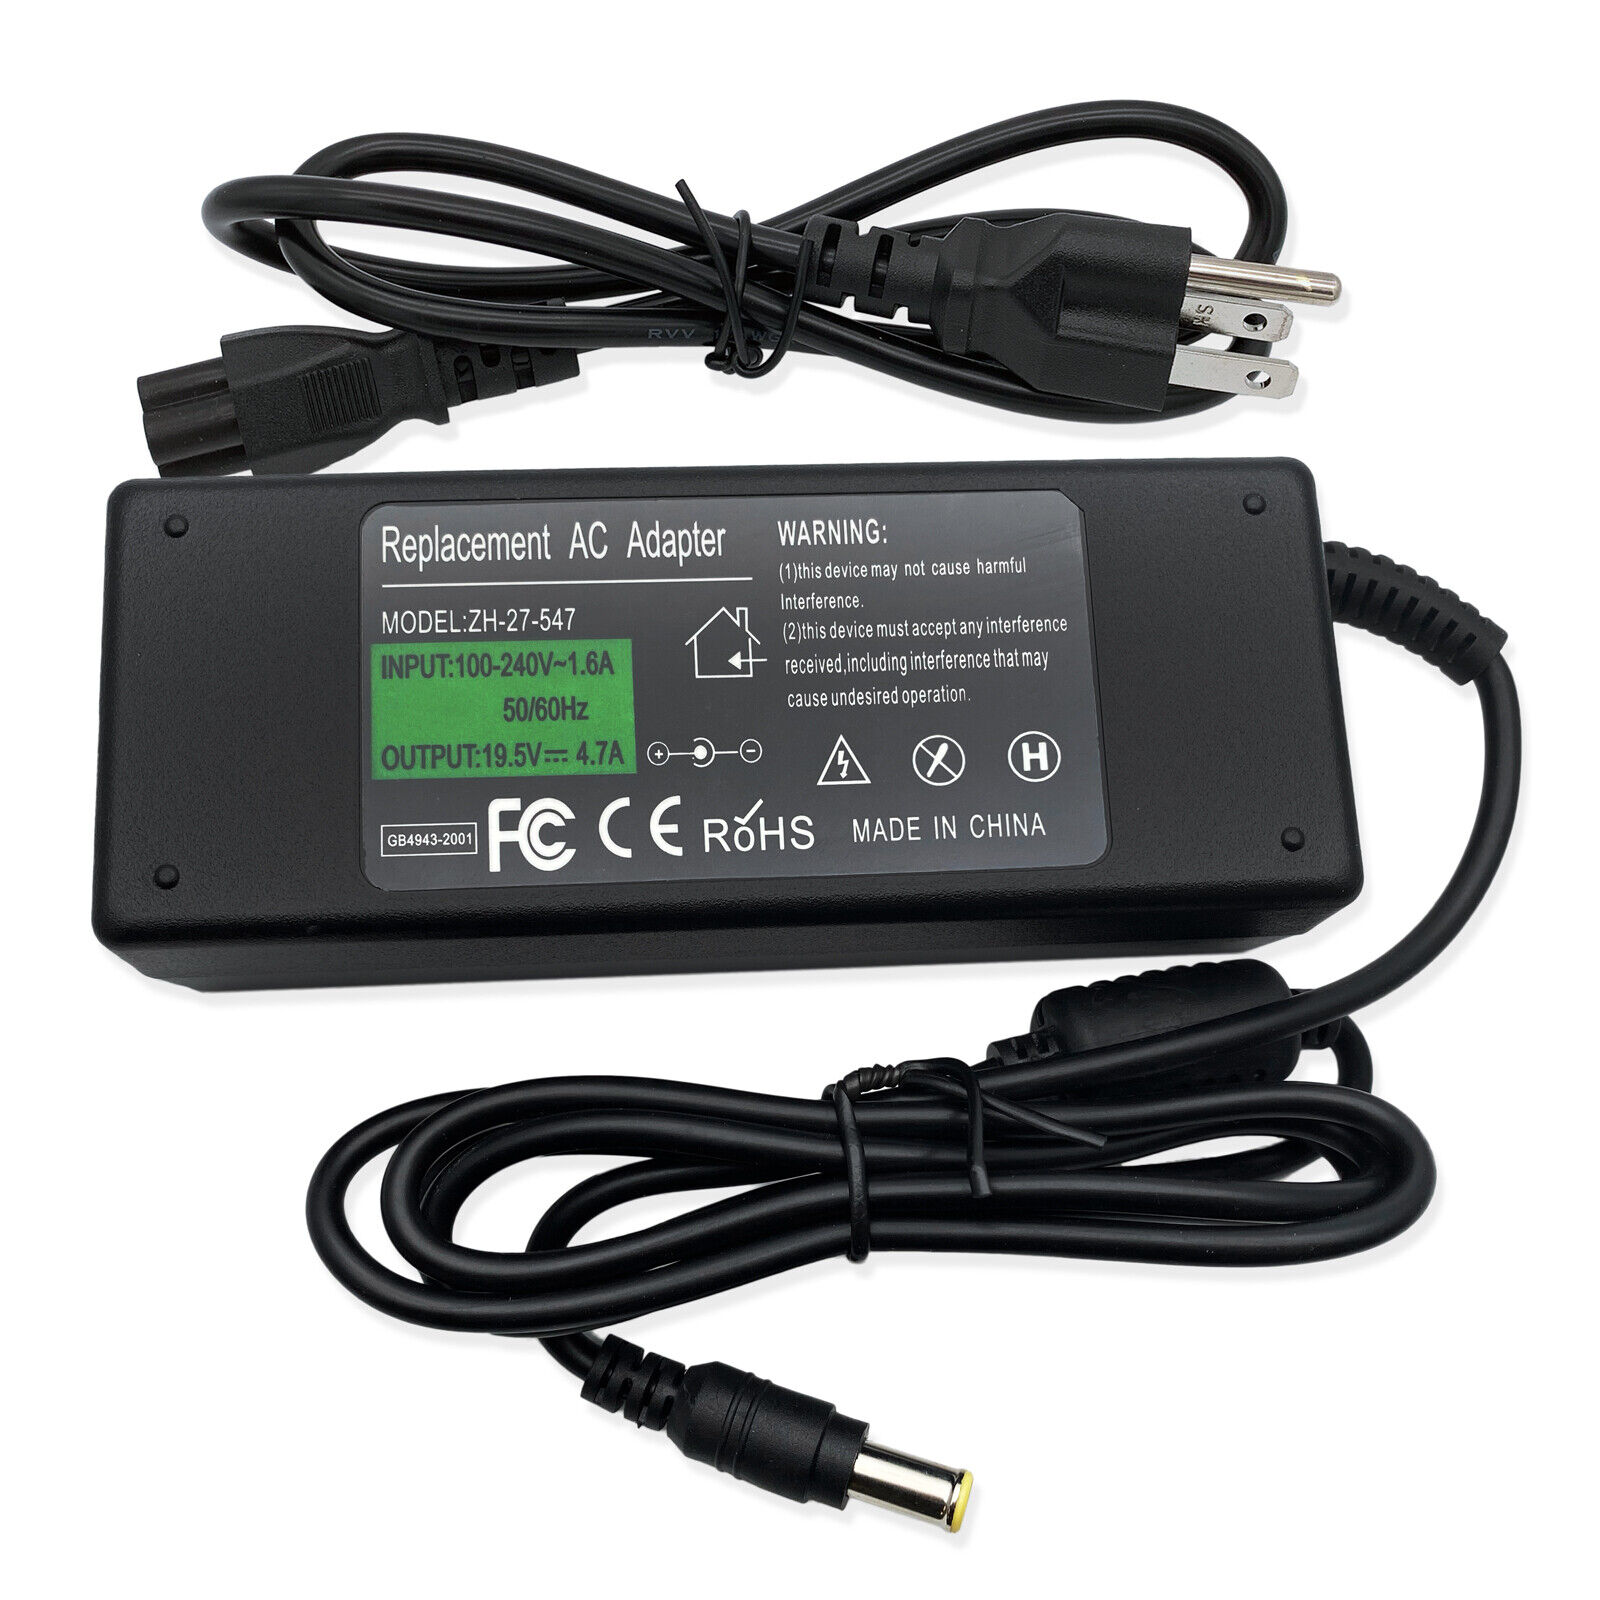 New AC Adapter Charger Power for Sony Vaio PCG-5K1L PCG-7133L PCG-7142L PCG-7Z2L